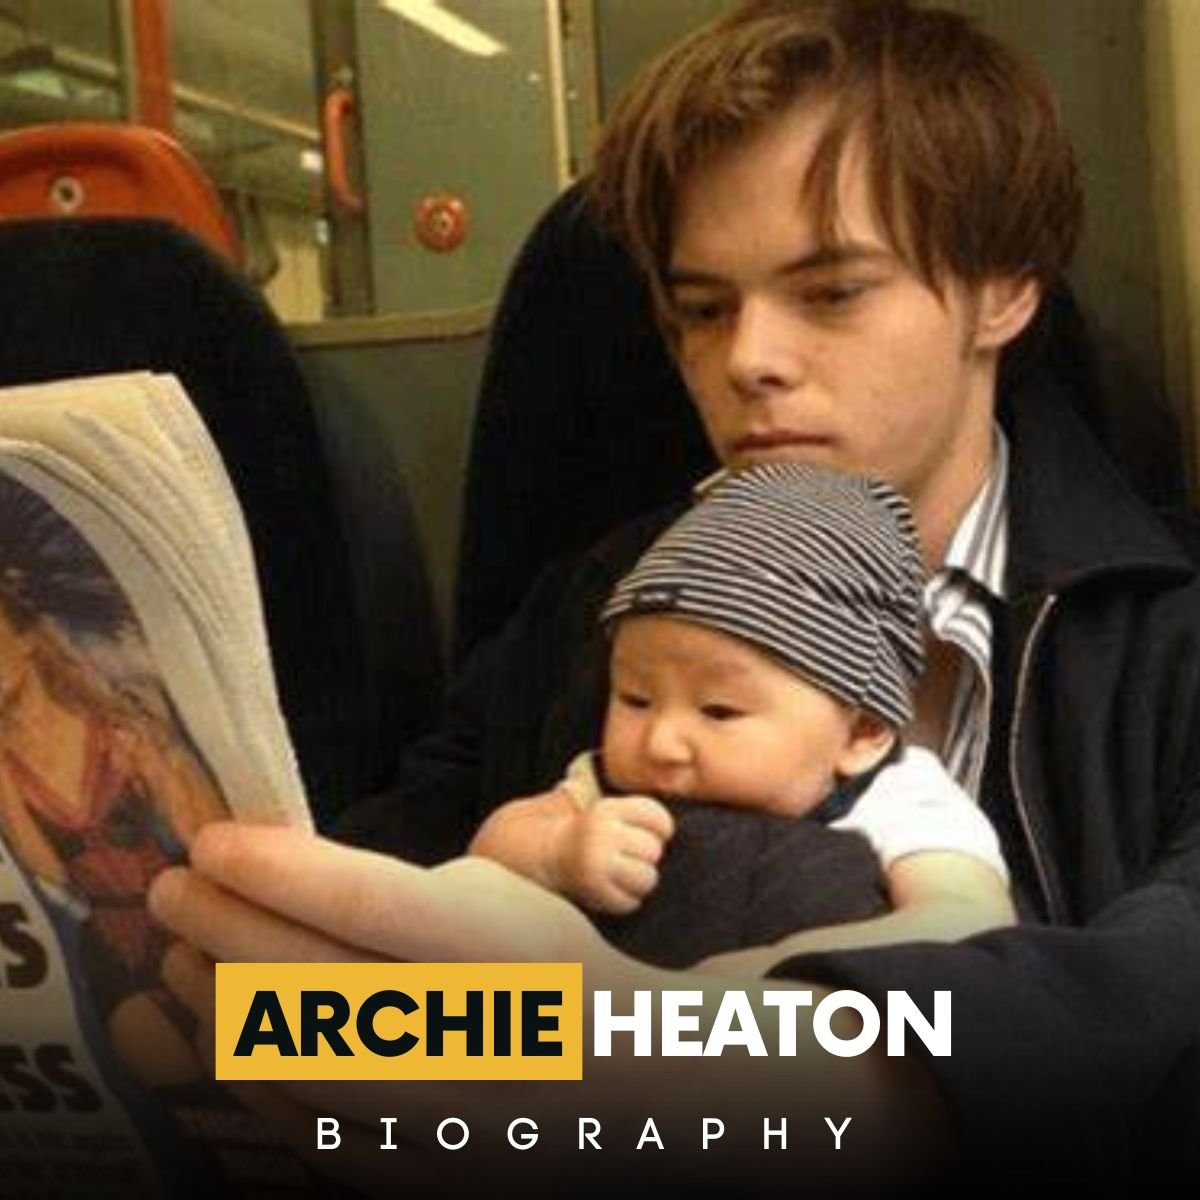 Meet Charlie Heaton’s Son, Archie Heaton & Know All About His Age, Family, And Life